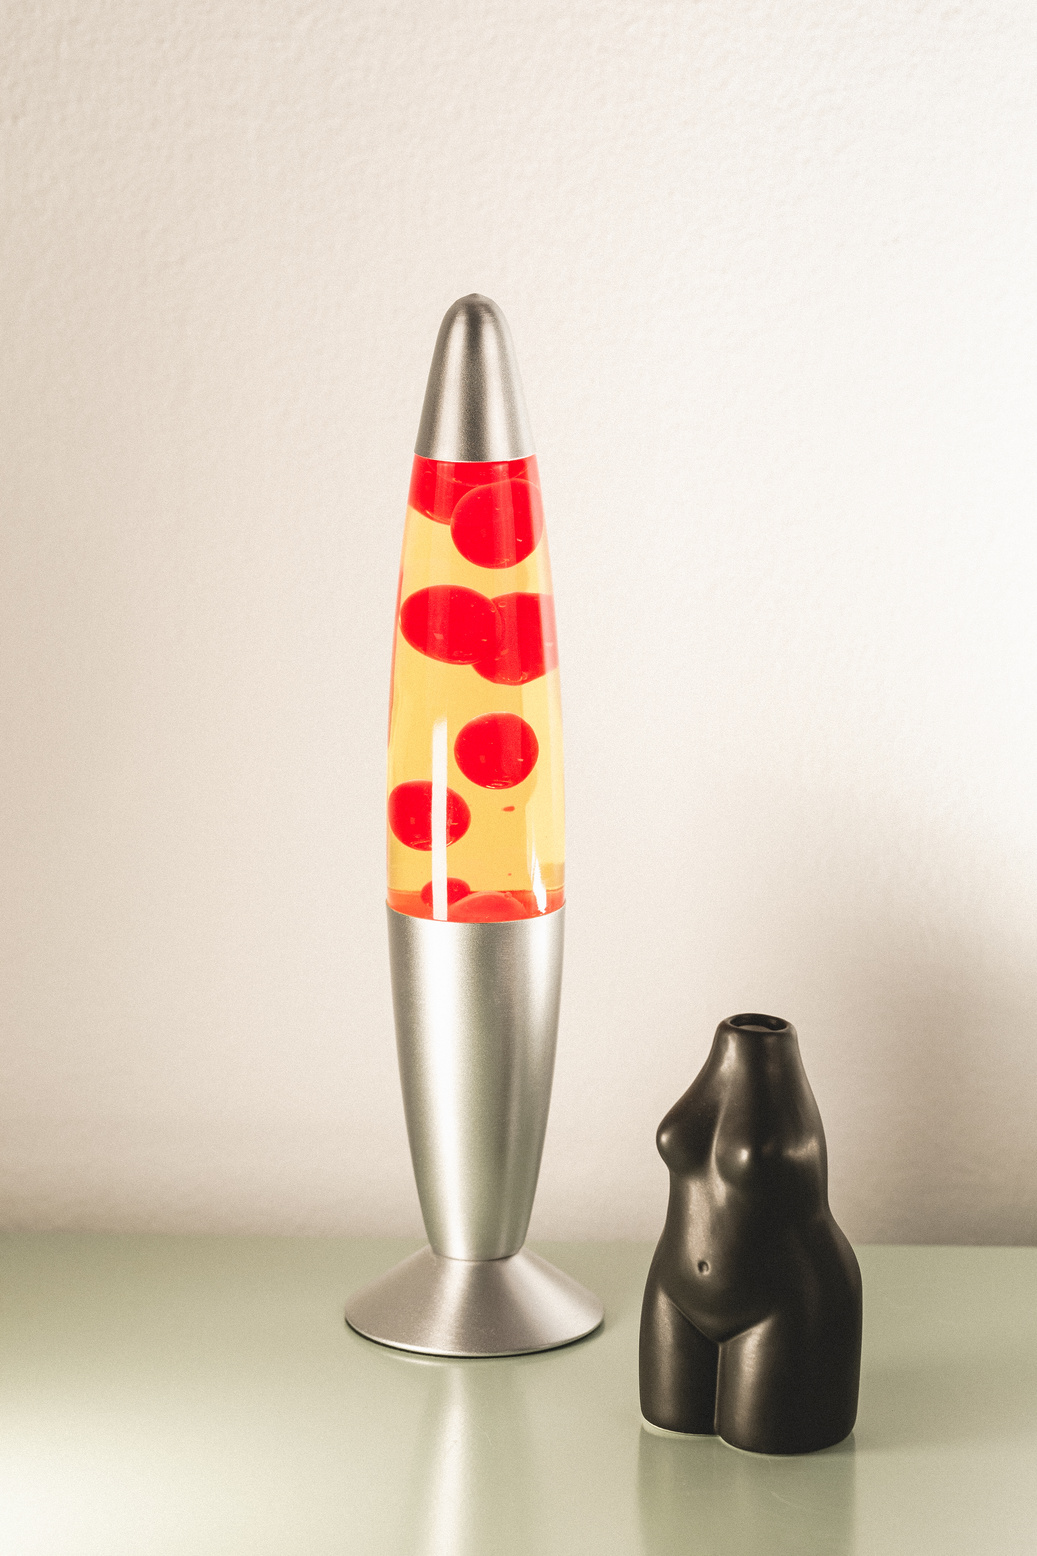 Lava Lamp and Body Statue on Glass Table